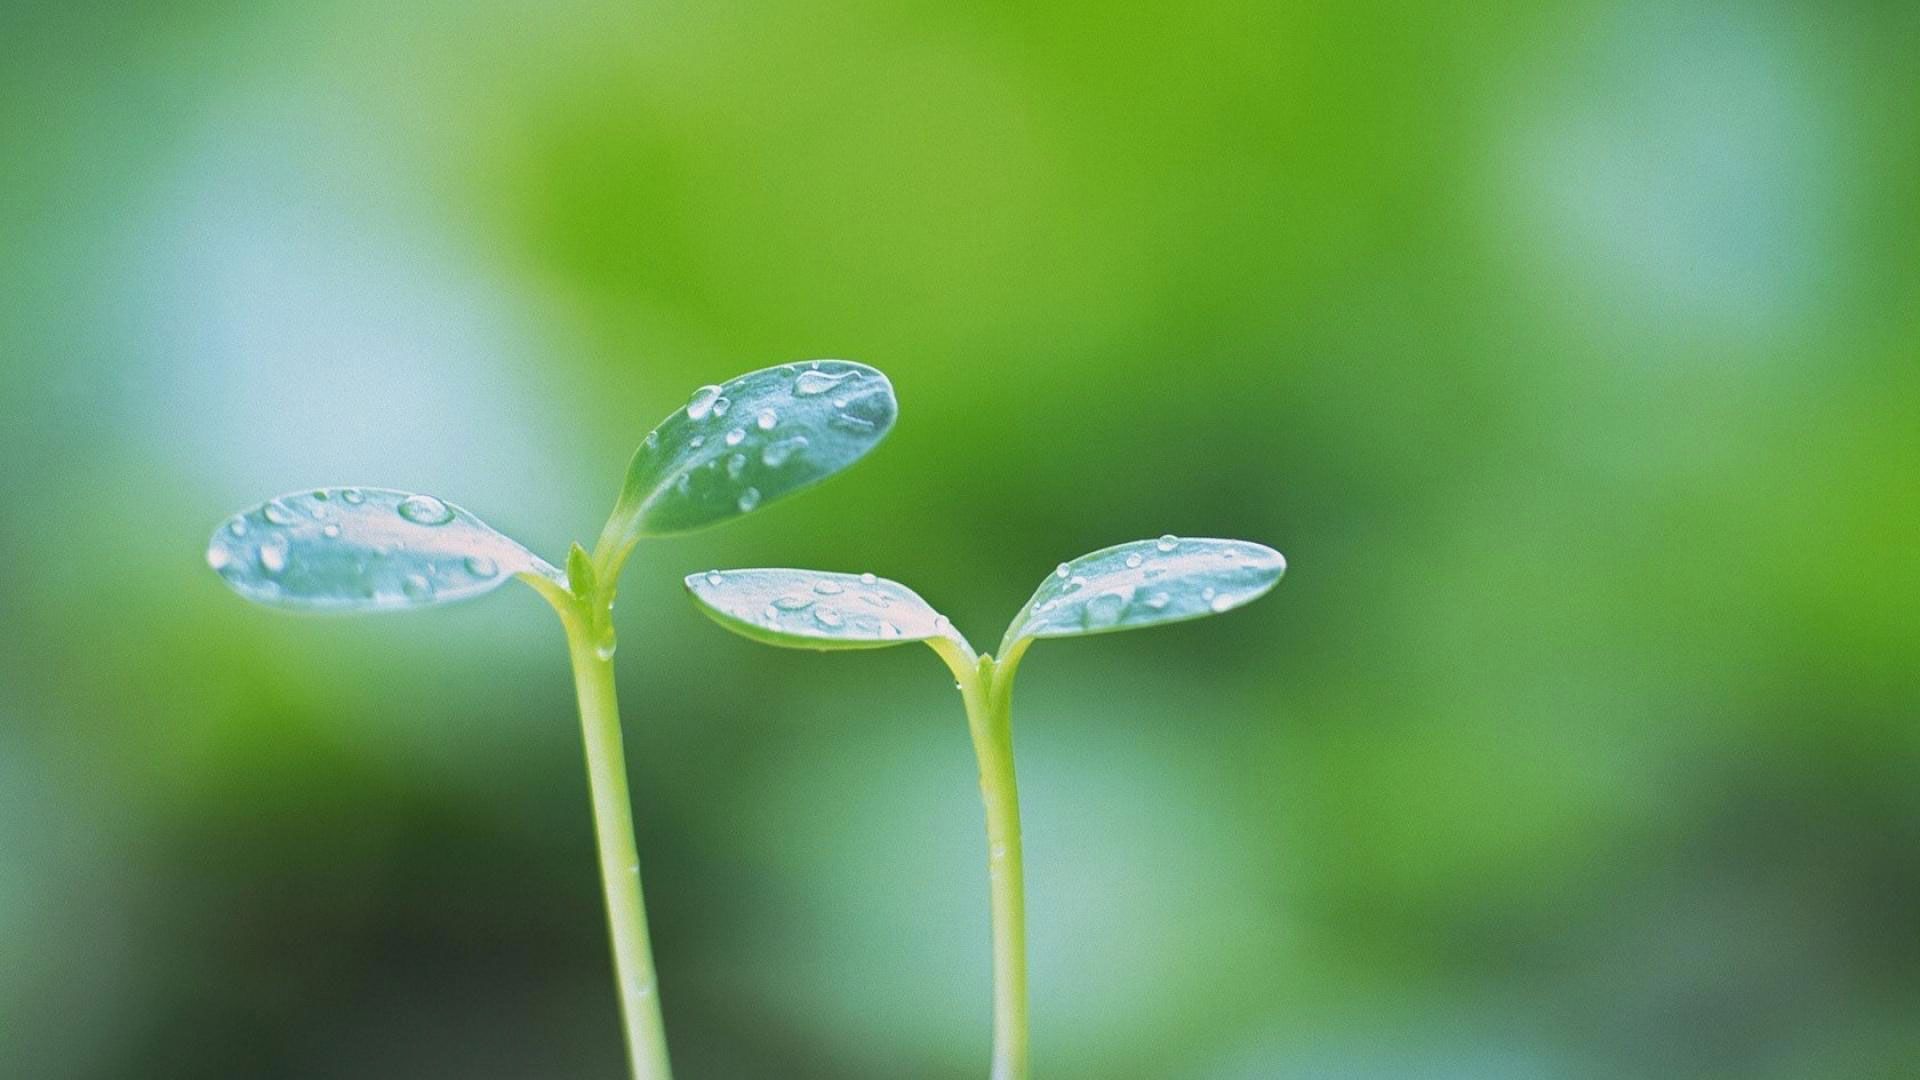 hd pics photo very attractive new born plant leaves water drops macro nature HD quality desktop background wal. Water drop on leaf, Plant wallpaper, Plant leaves